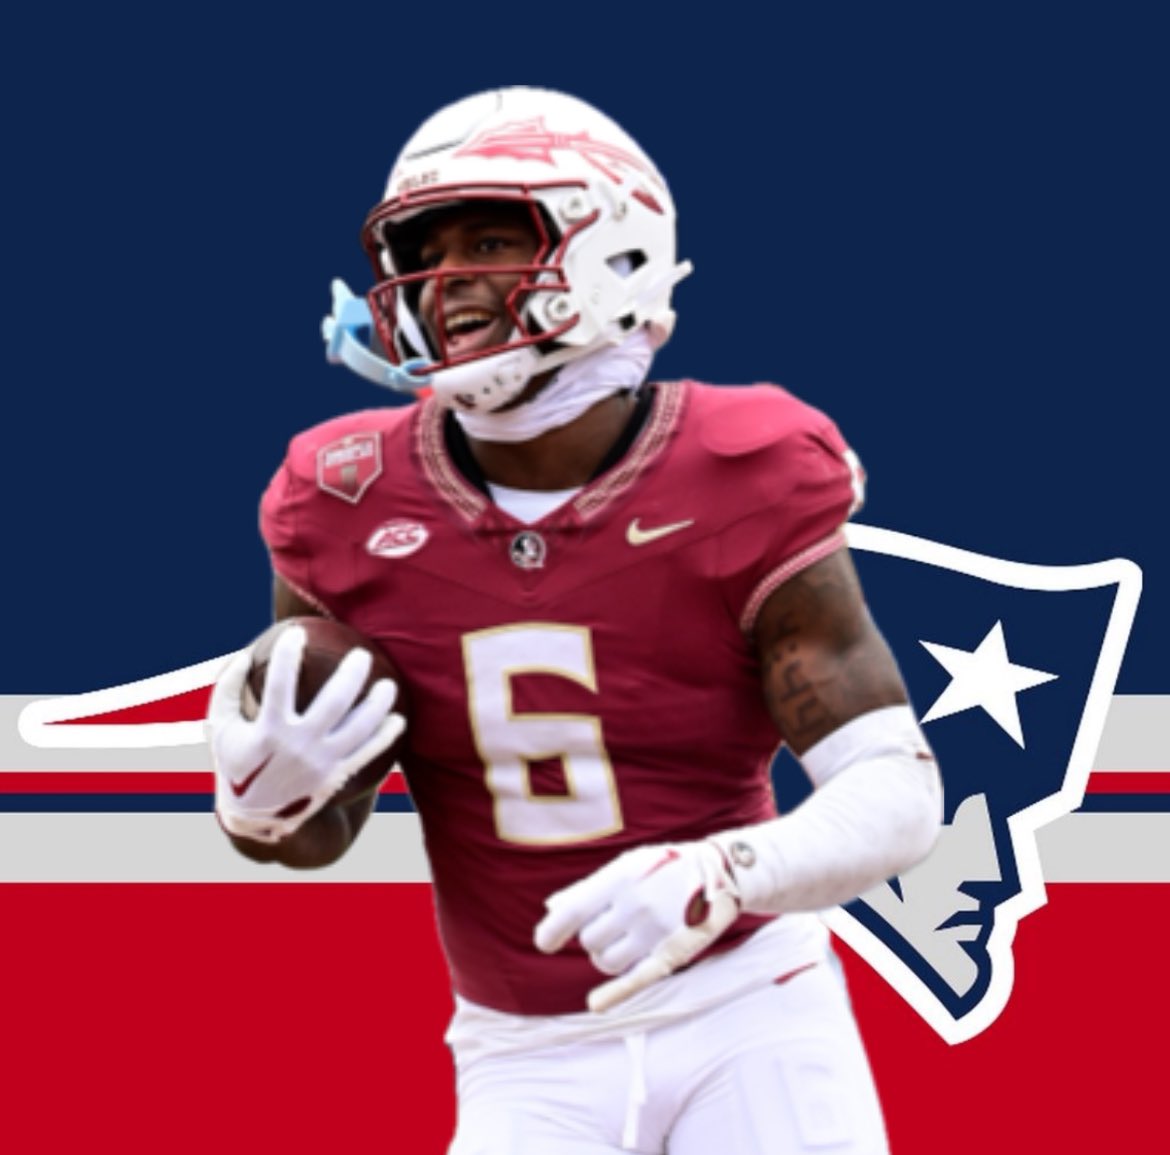 WELCOME TO THE NEW ENGLAND #PATRIOTS JAHEIM BELL